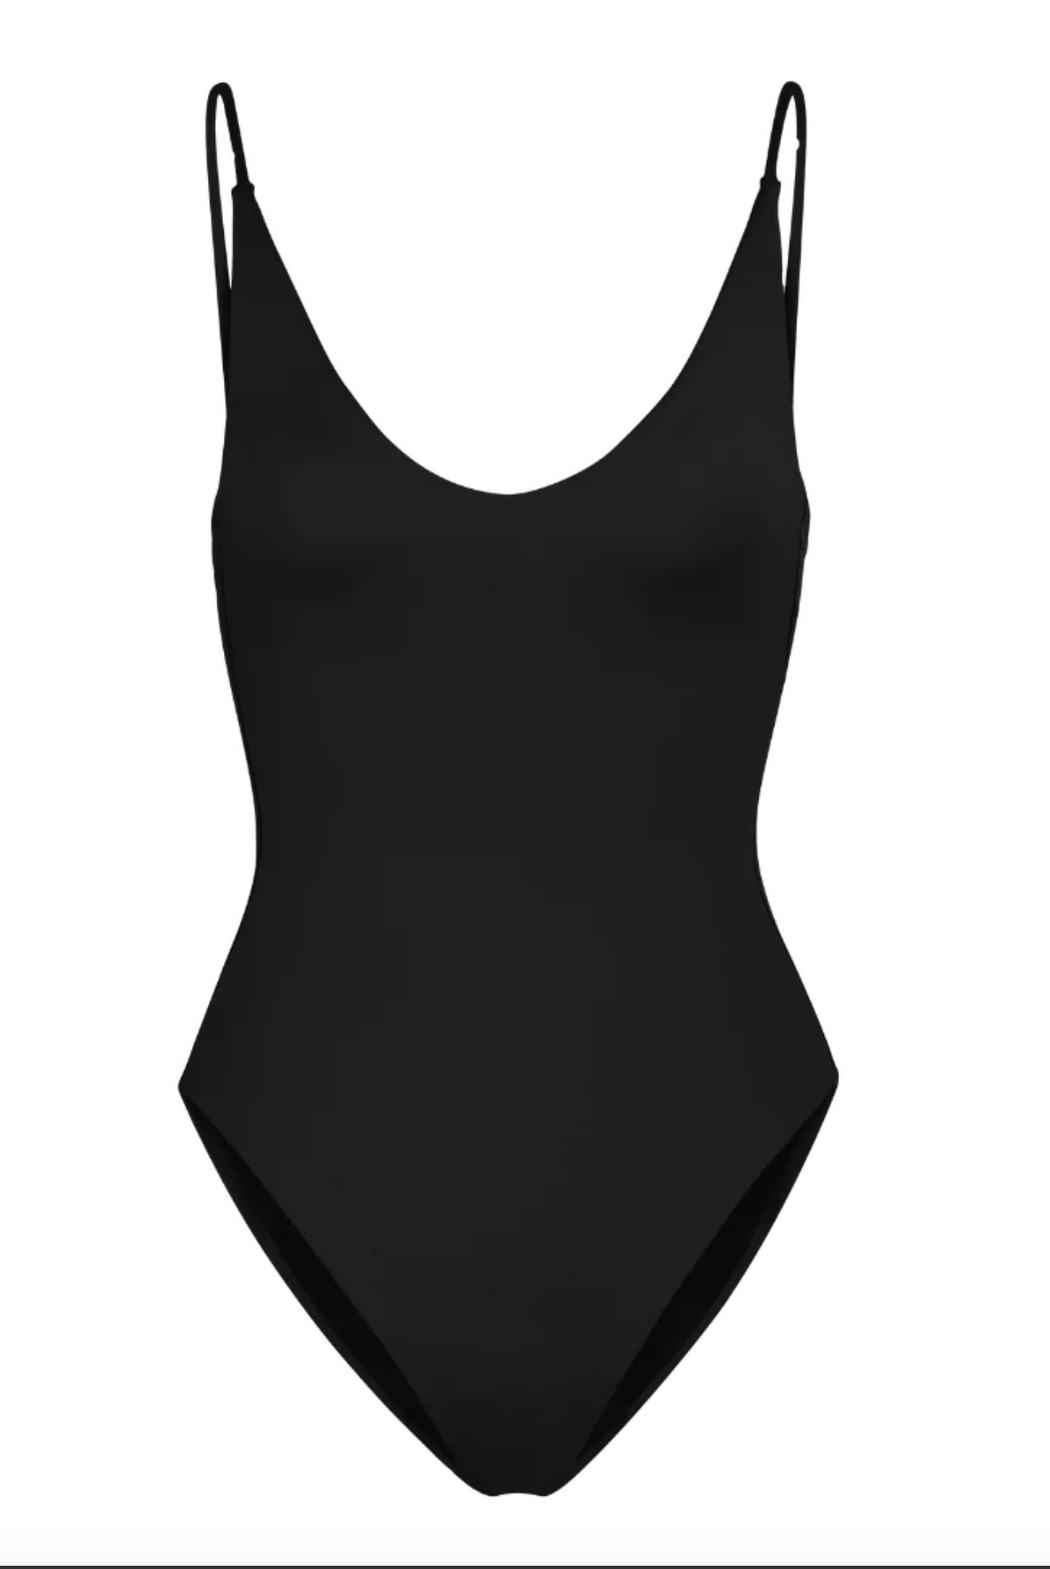 Left on Friday :: Sunday Suit One Piece